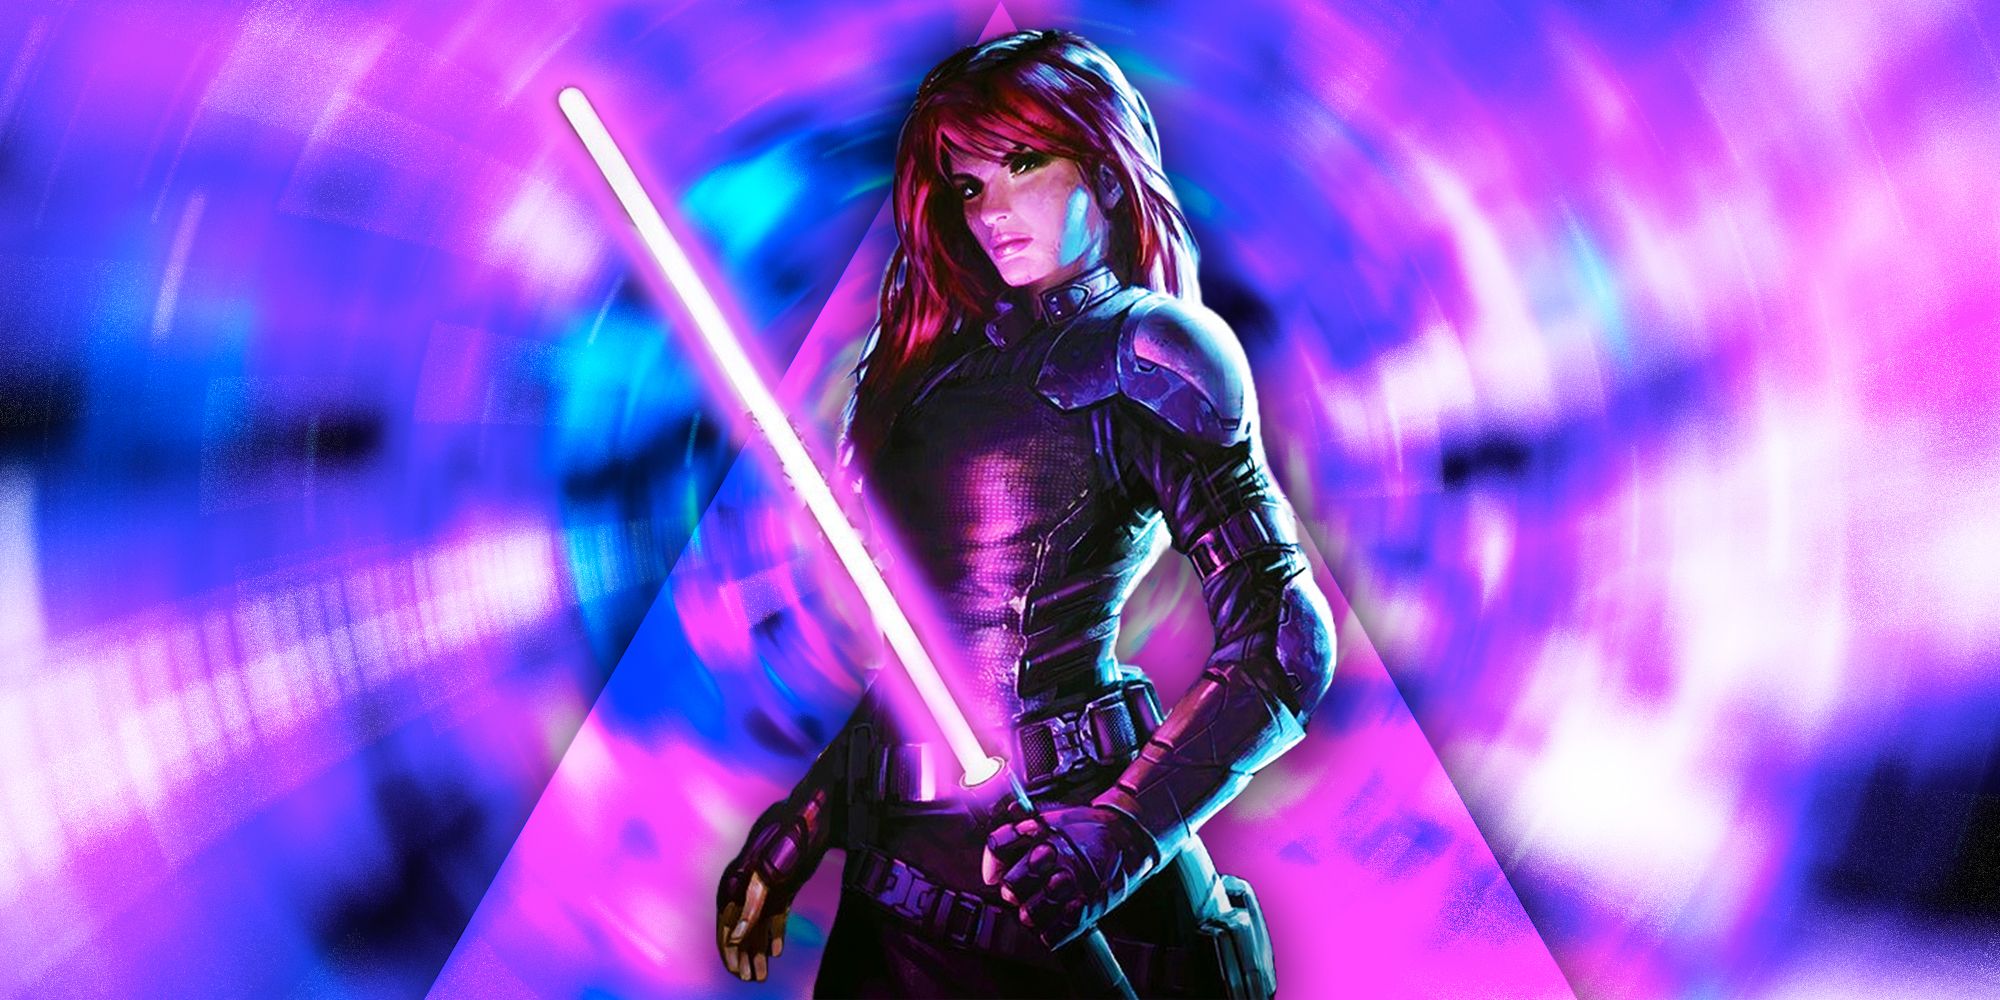 Mara Jade as depicted in Star Wars Legends with her purple blade superimposed over a triangle background